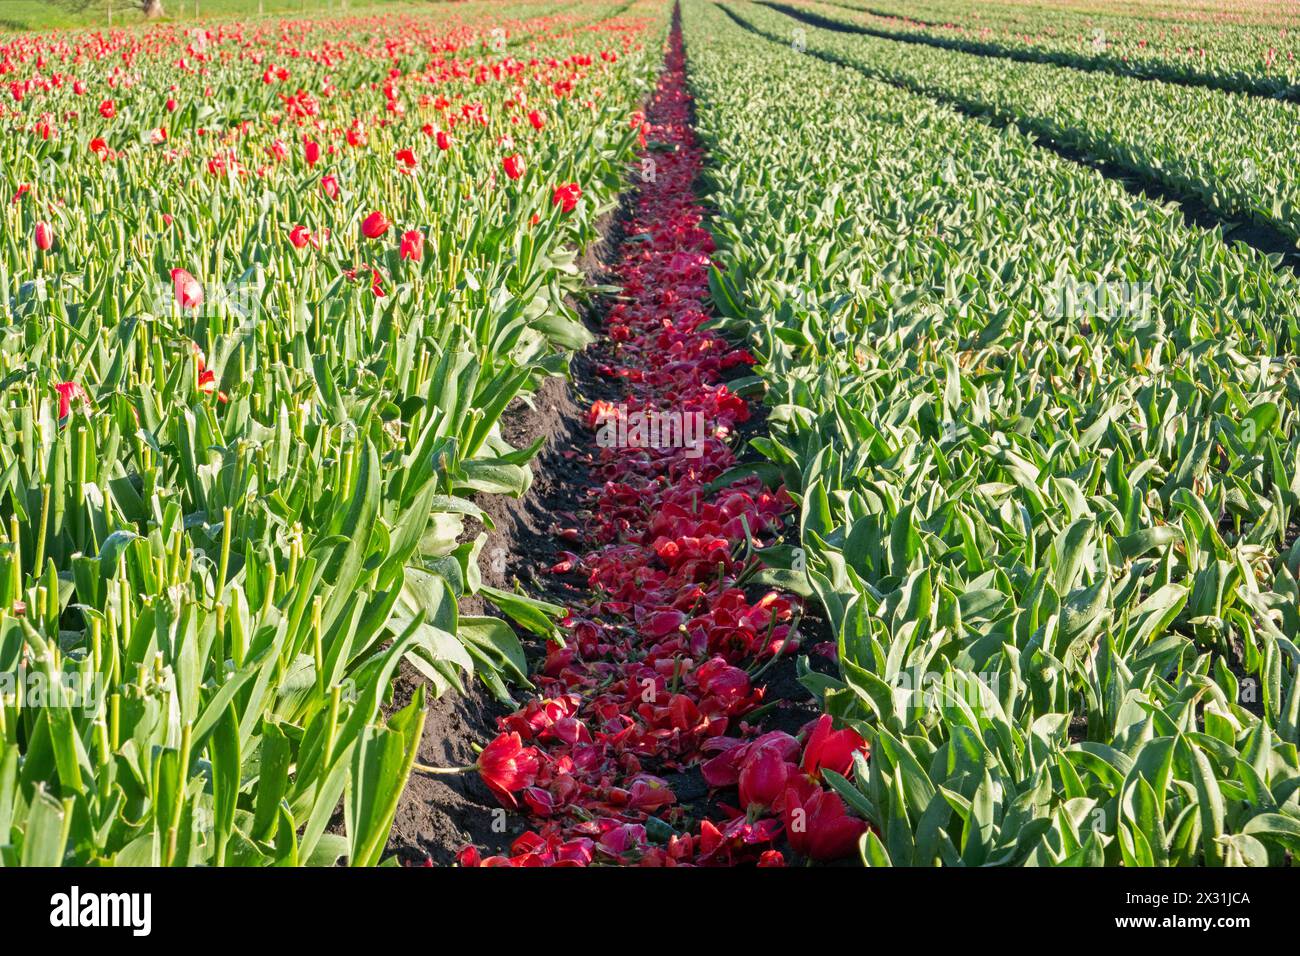 Cultivation of tulip bulbs, flower heads have been cut off Stock Photo